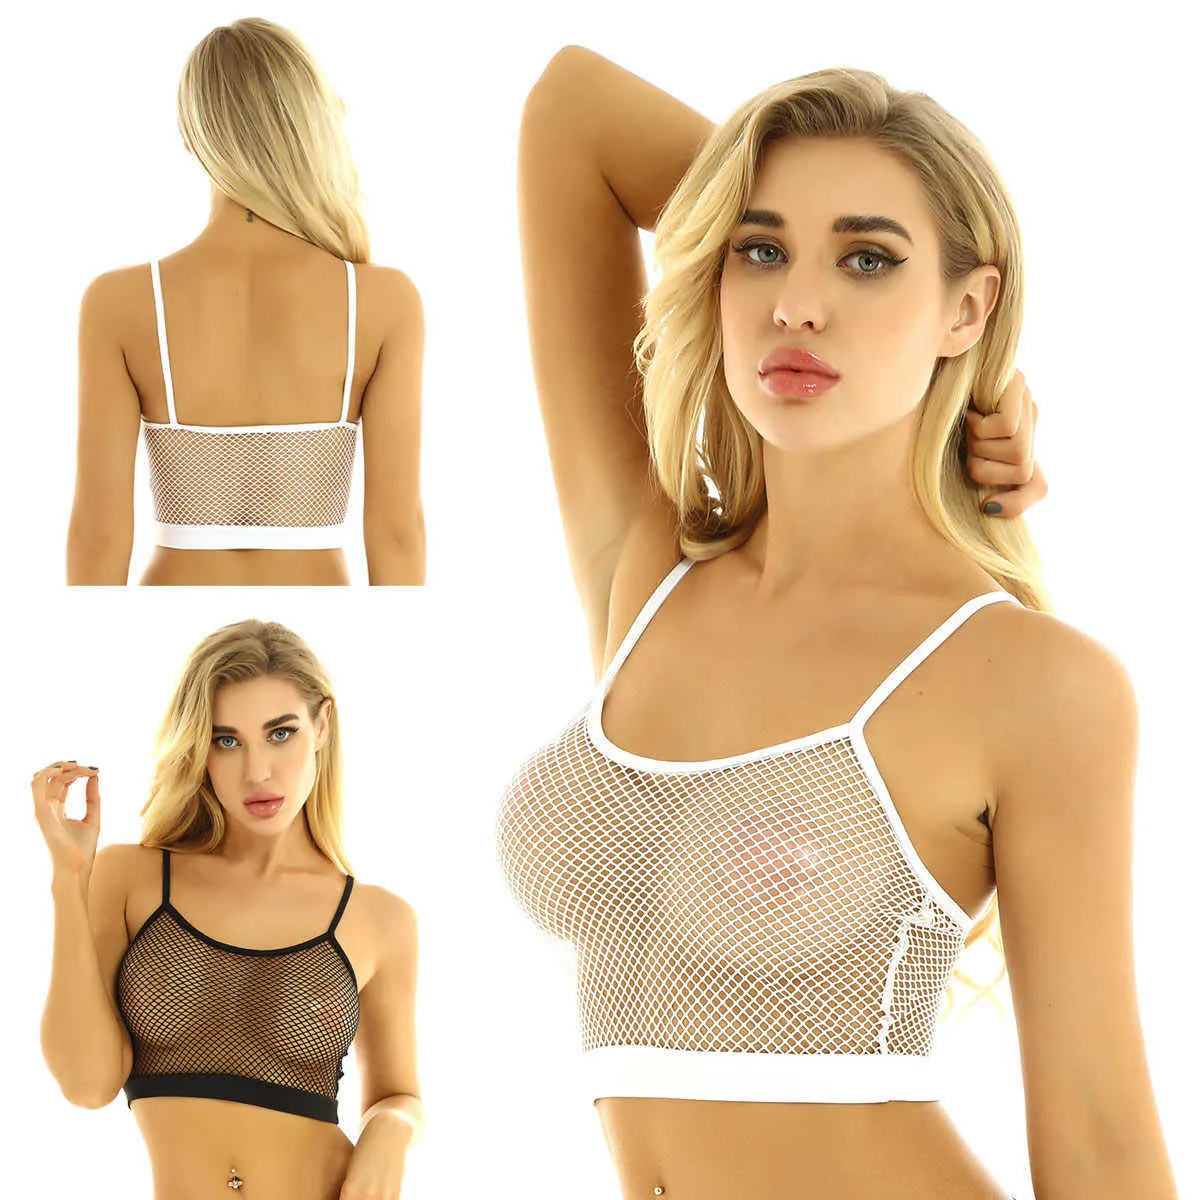 Women's Mesh Crop Tops Lace See Through Lingerie Tops Sleeveless